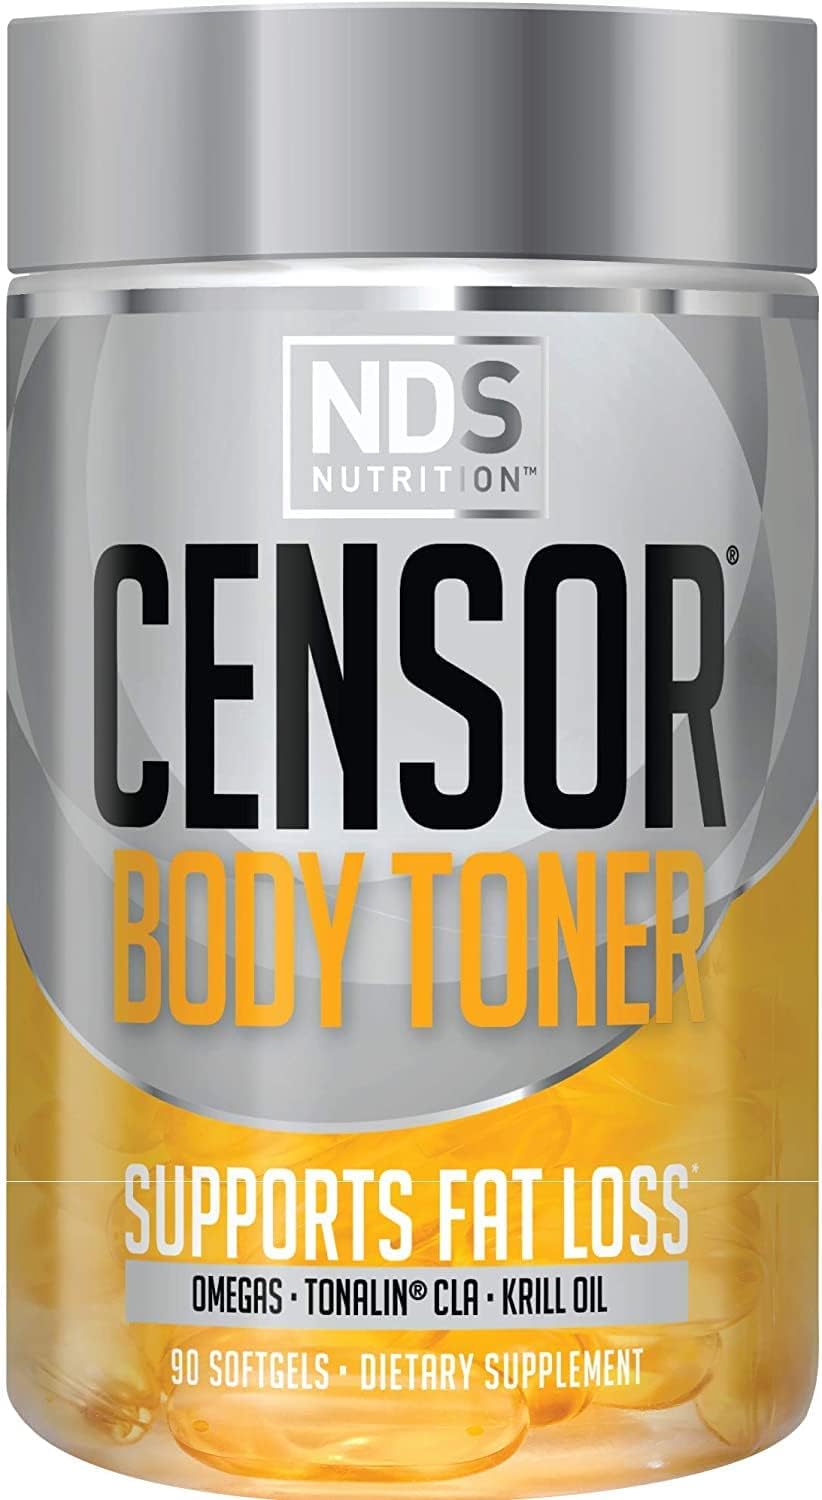 Censor NDS Nutrition Fat Loss and Body Toner with CLA, Fish Oil, Safflower and Omega 3-6-9 Blend - Dietary Supplement for Improved Energy and Health (90 Softgels)